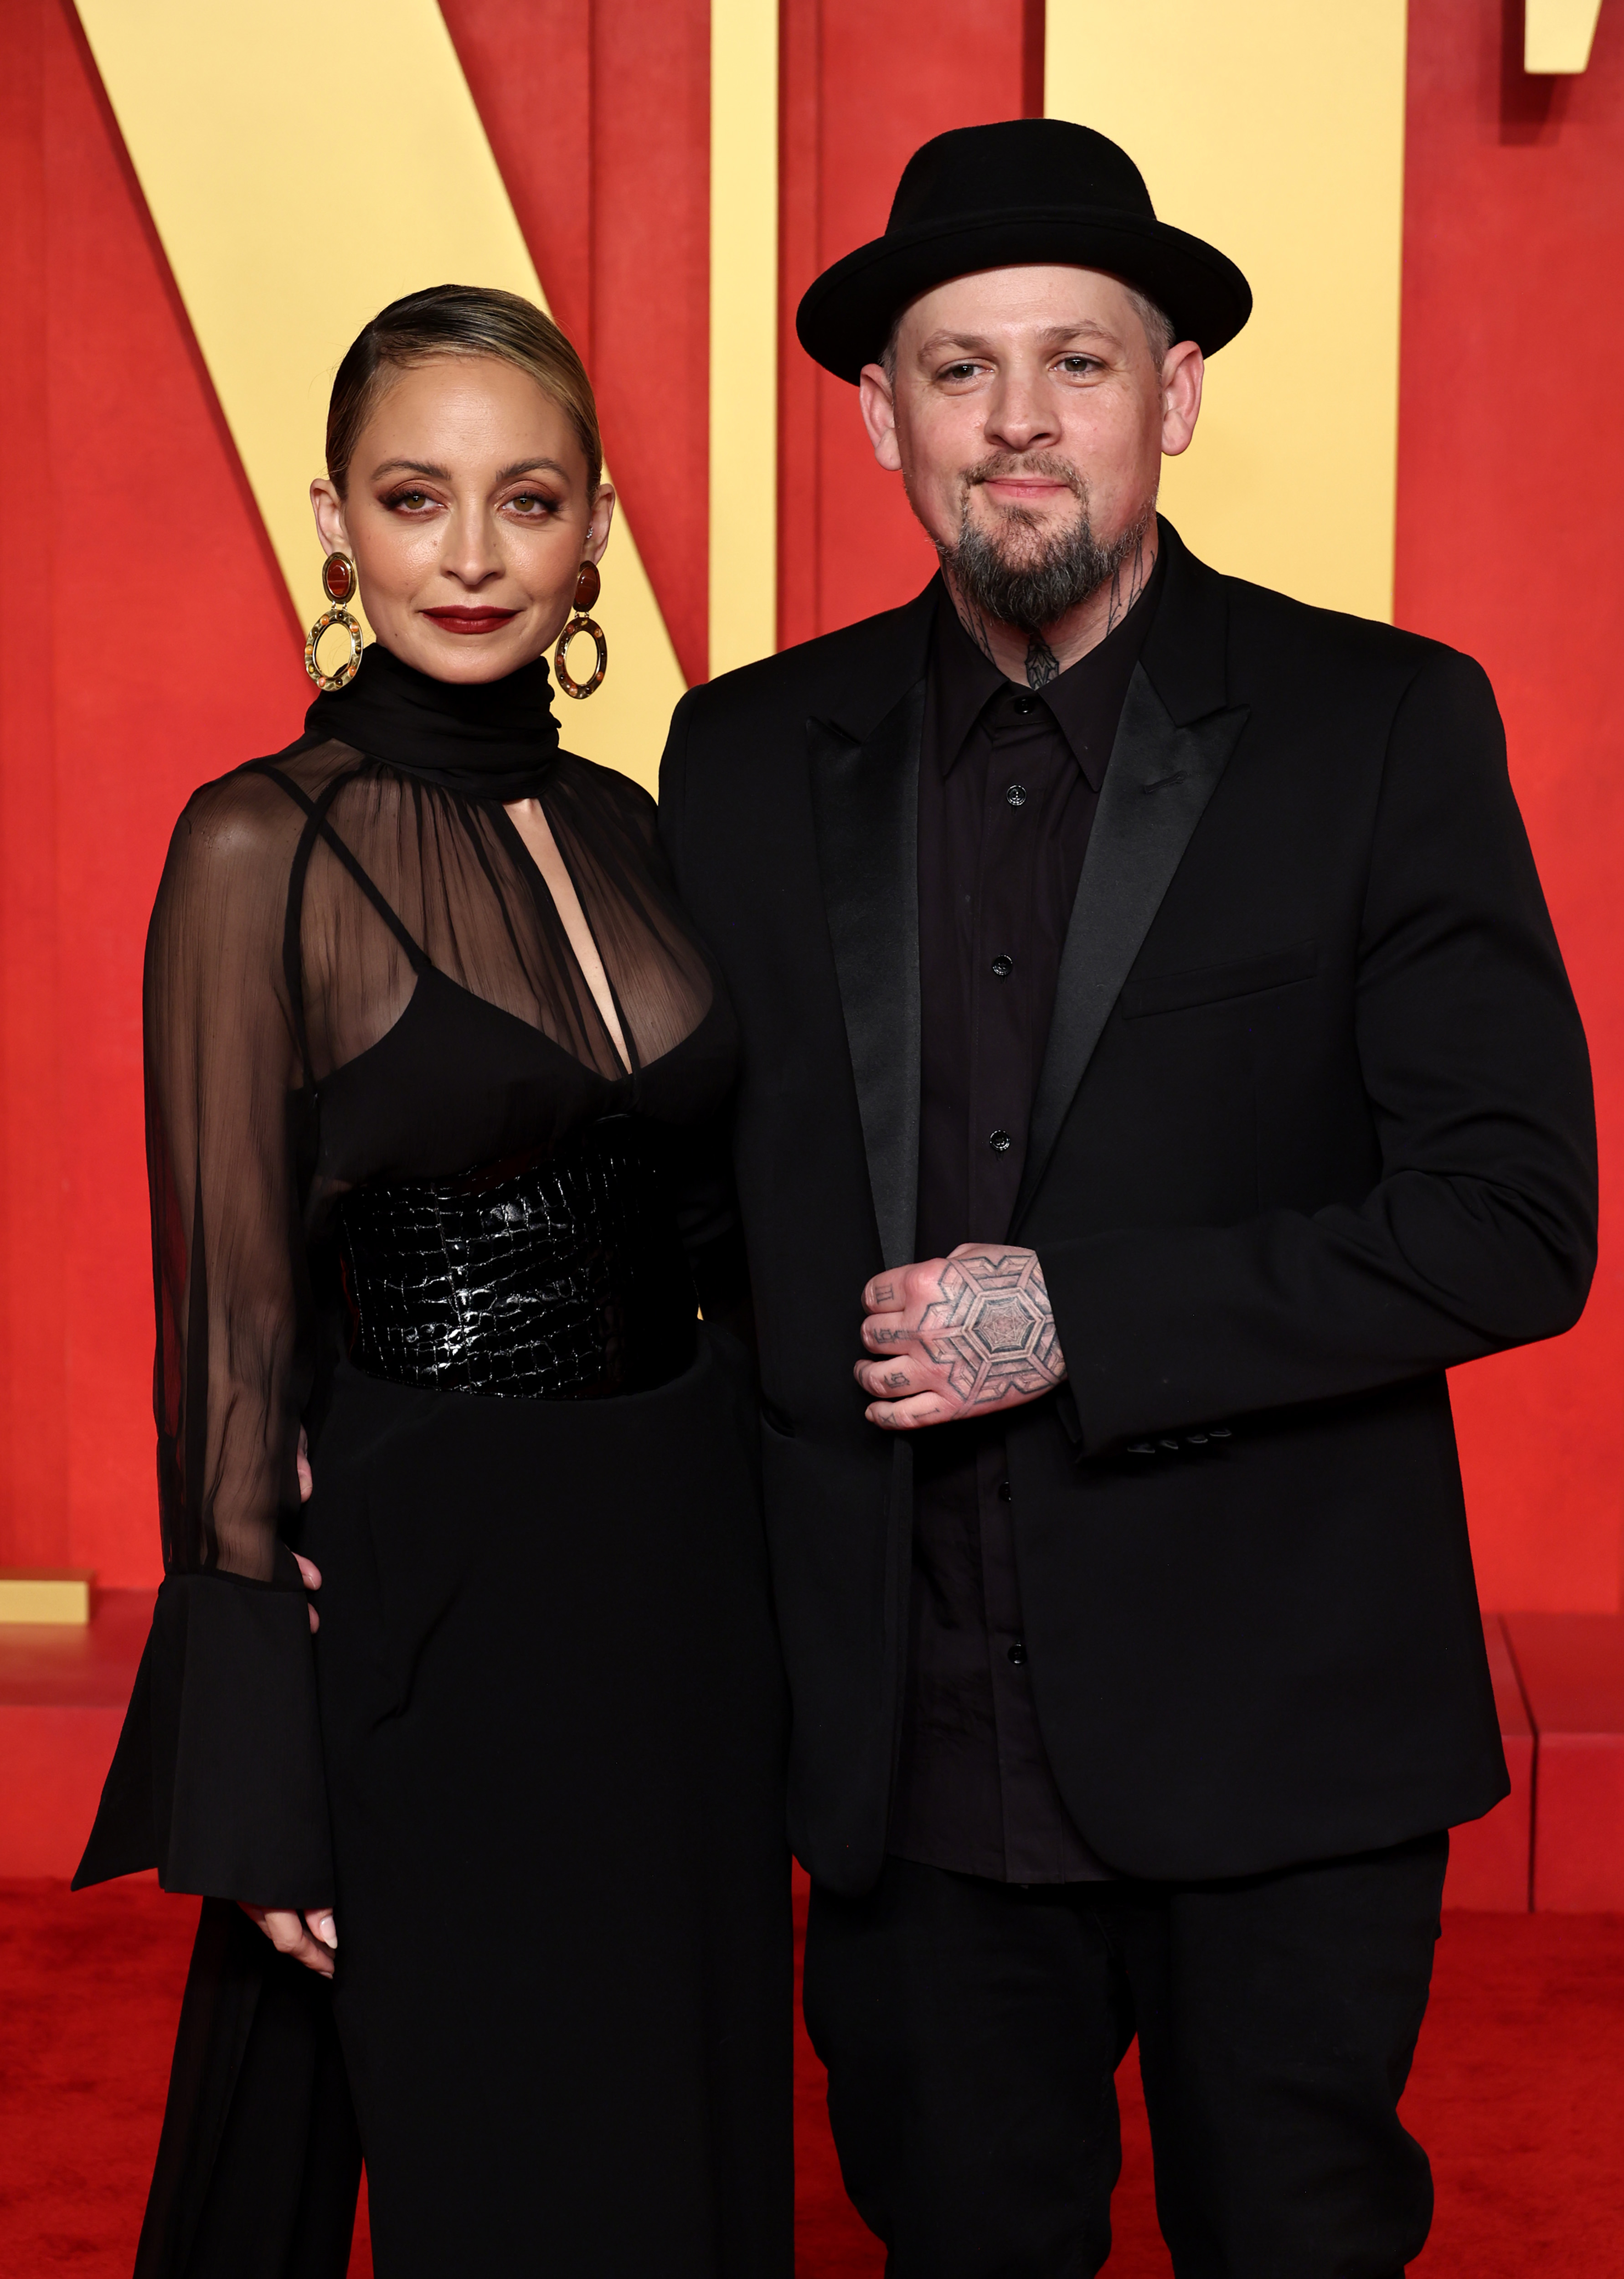 Two people posing, one in a sheer black dress and the other in a suit with a hat, at a formal event